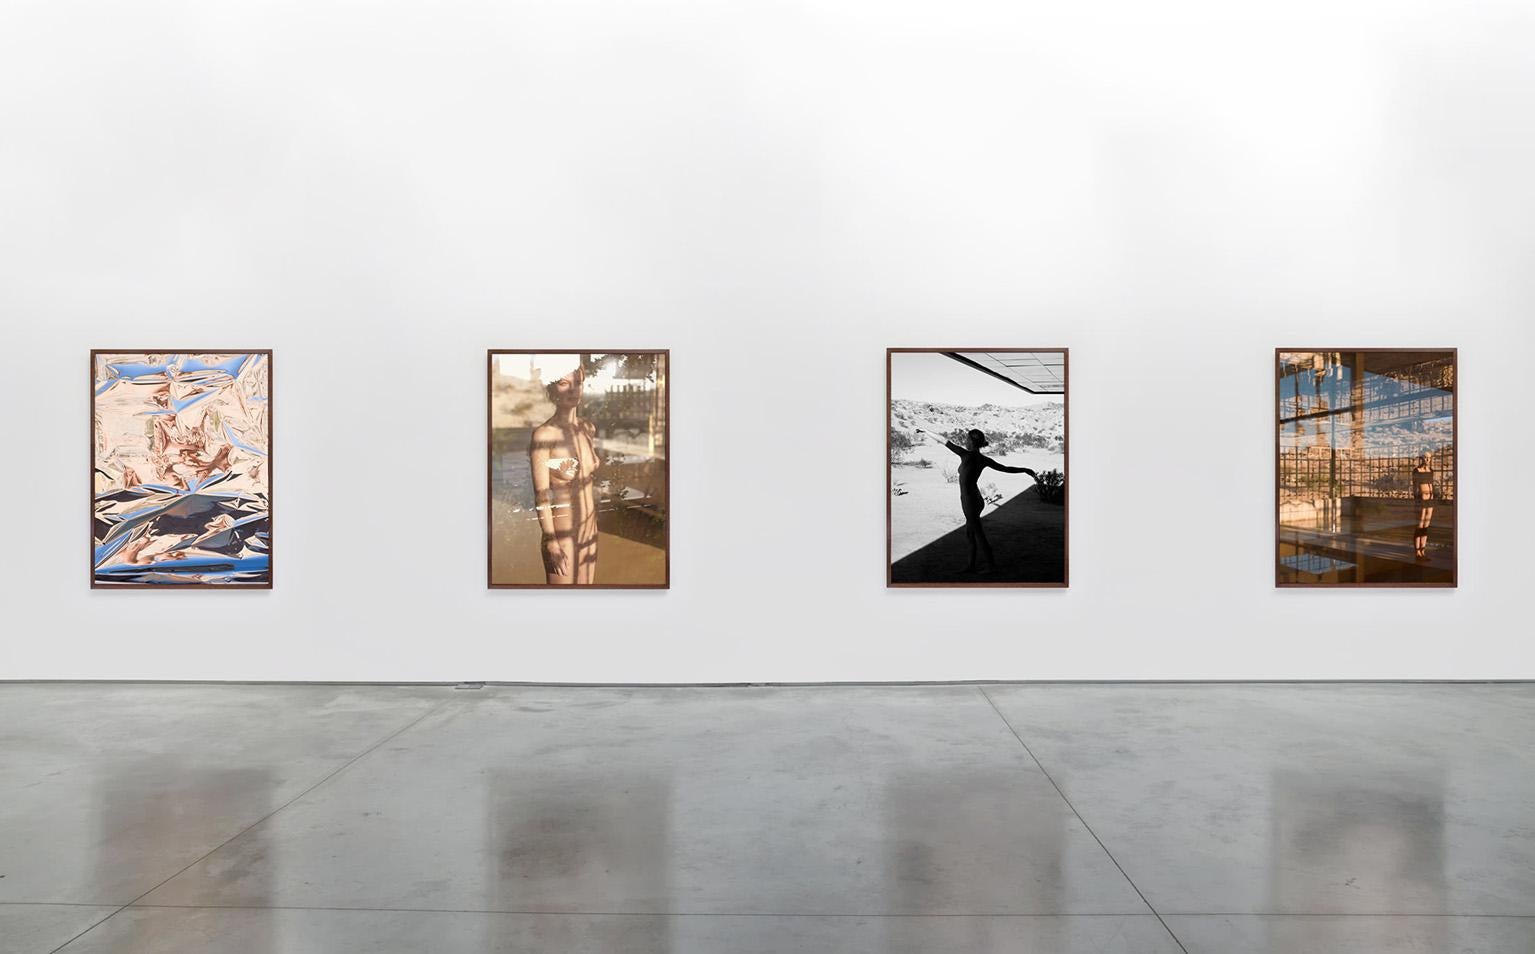 She Disappeared into Complete Silence (AD6539) - large scale abstract photograph - Photograph by Mona Kuhn